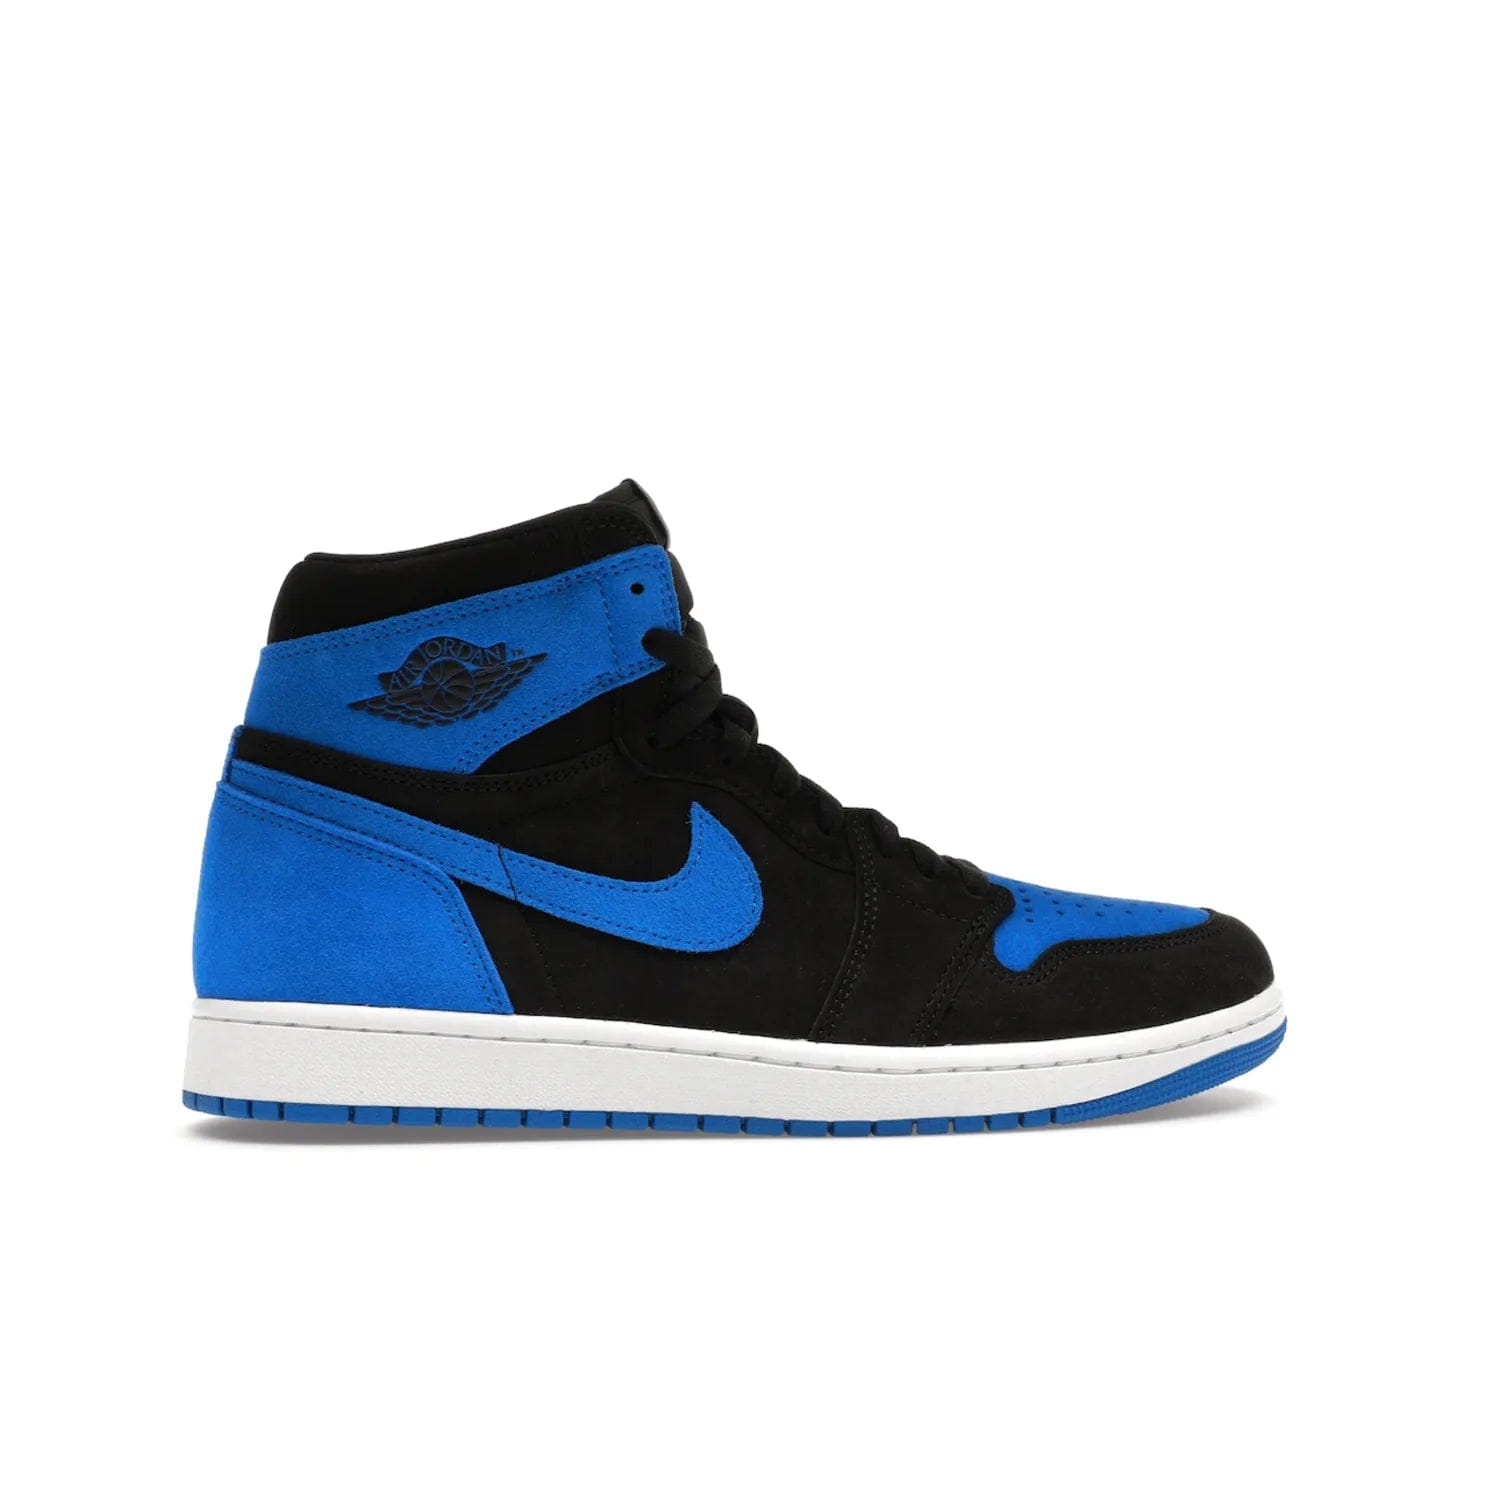 Jordan 1 Retro High OG Royal Reimagined - Image 36 - Only at www.BallersClubKickz.com - ####
Old meets the new: Jordan 1 Retro High OG 'Royal Reimagined' is a bold statement of evolution with its royal blue and black suede material makeup. Swoosh overlays, Wings logos, padded ankle collars and Nike Air tags maintain the OG's legendary lineage. Get a pair on November 4th and be part of a fearless, unyielding story.